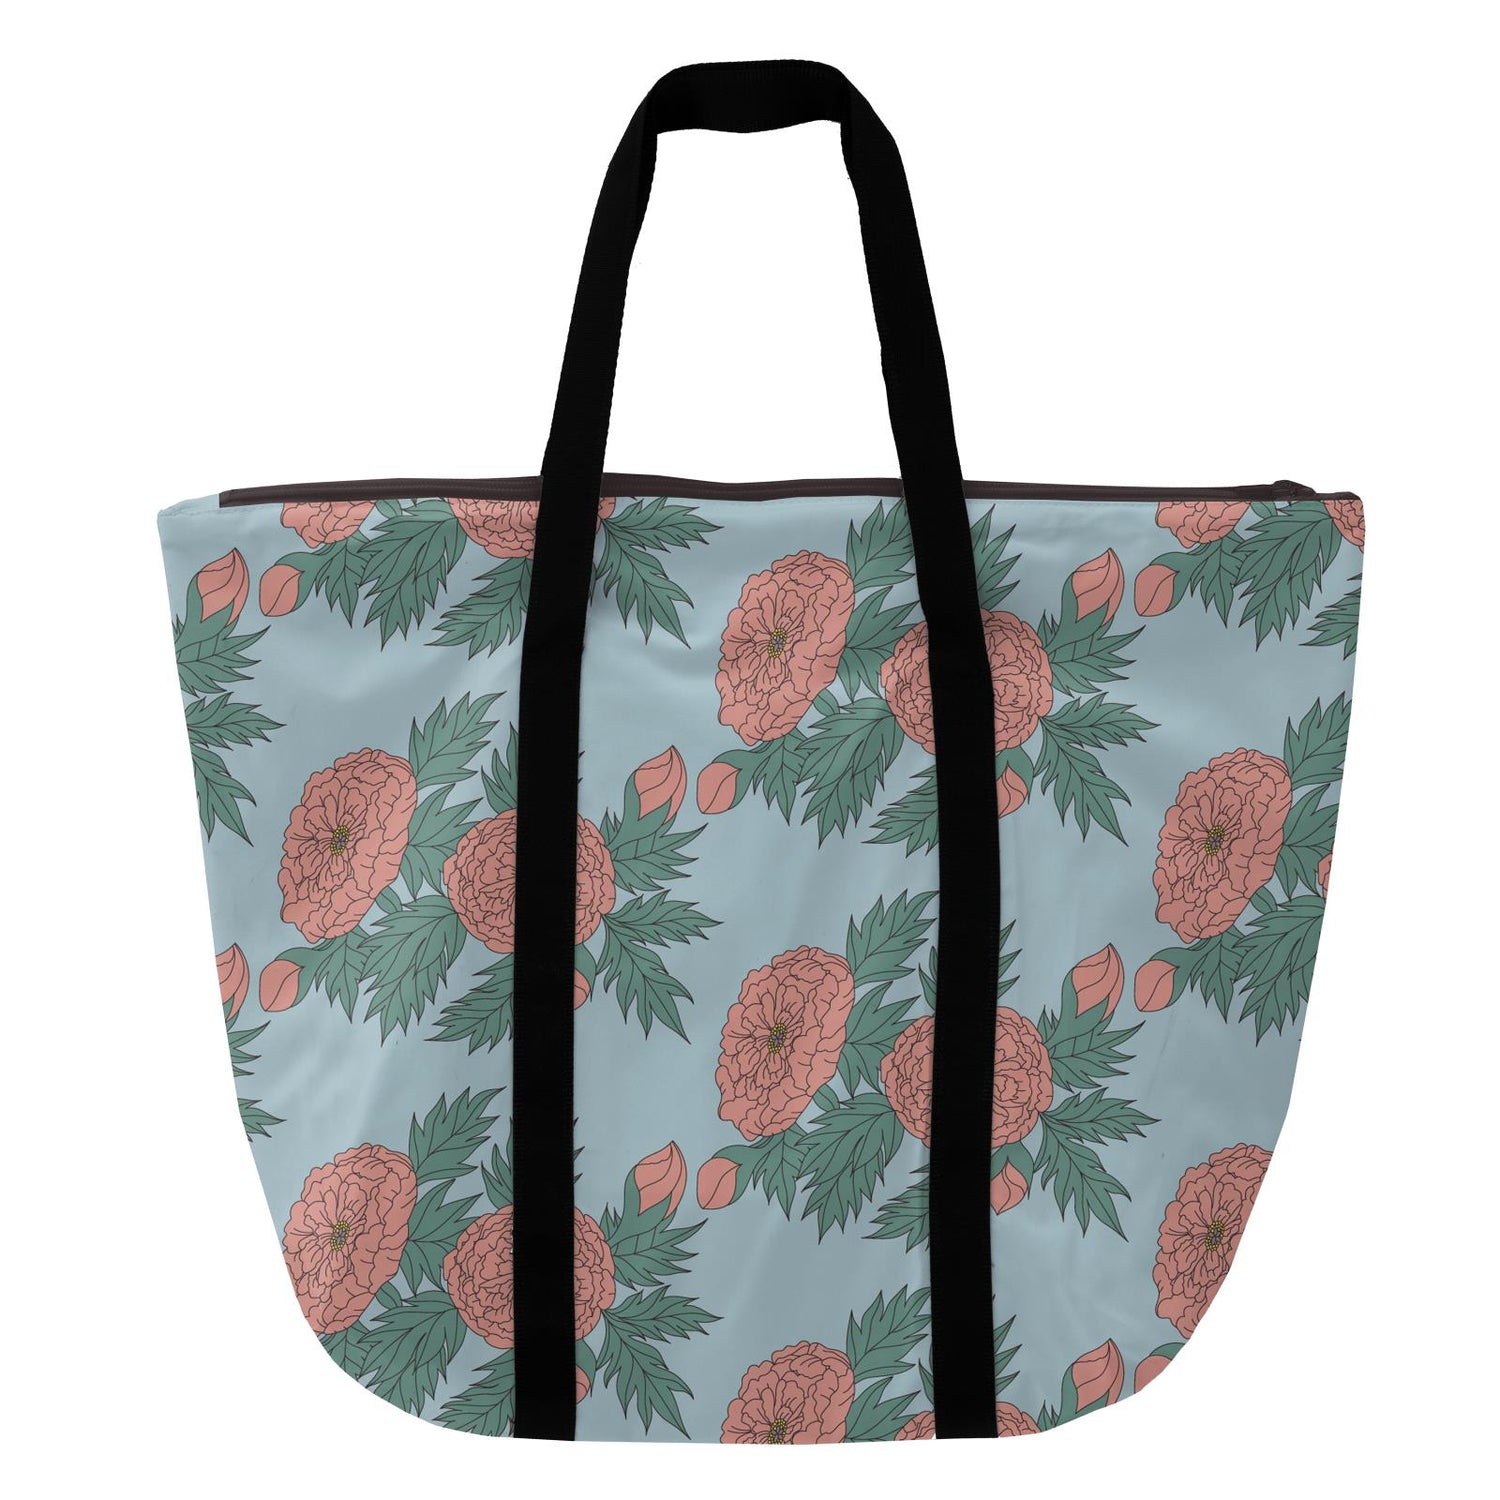 Print Coated Woven Tote Bag in Spring Sky Floral